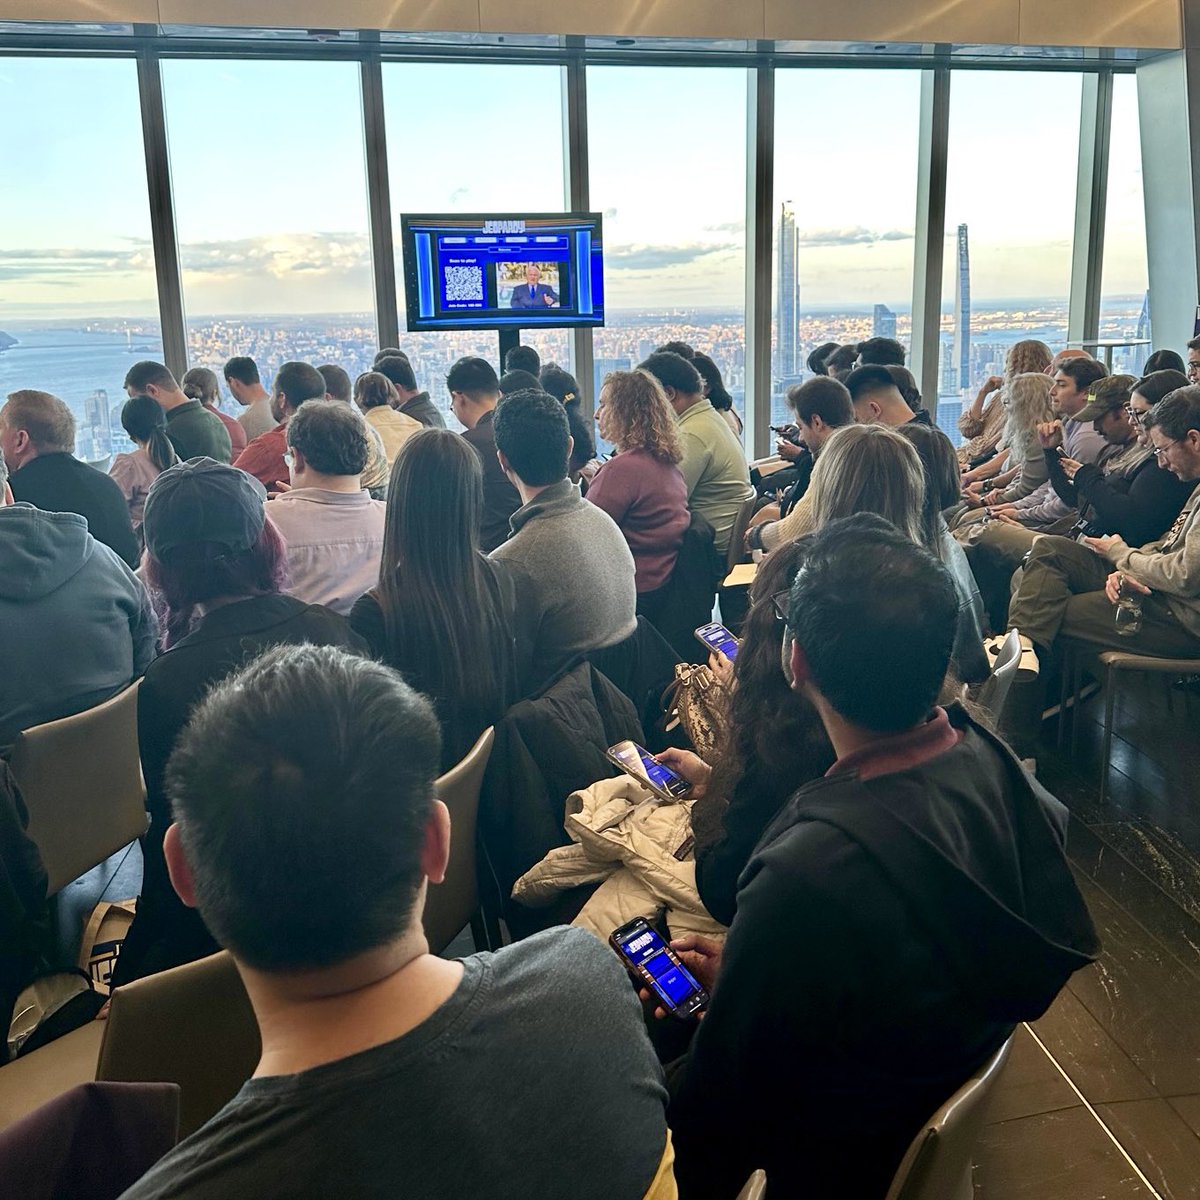 ICYMI✨For the 1st time ever, guests played TimePlay’s new, #interactivegame of #jeopardy ! hosted by none other than Ken Jennings.  We’re thrilled & honored to be part of such an incredible brand event to celebrate its 60th anniversary. #quiz #trivia #edgenyc #hudsonyards